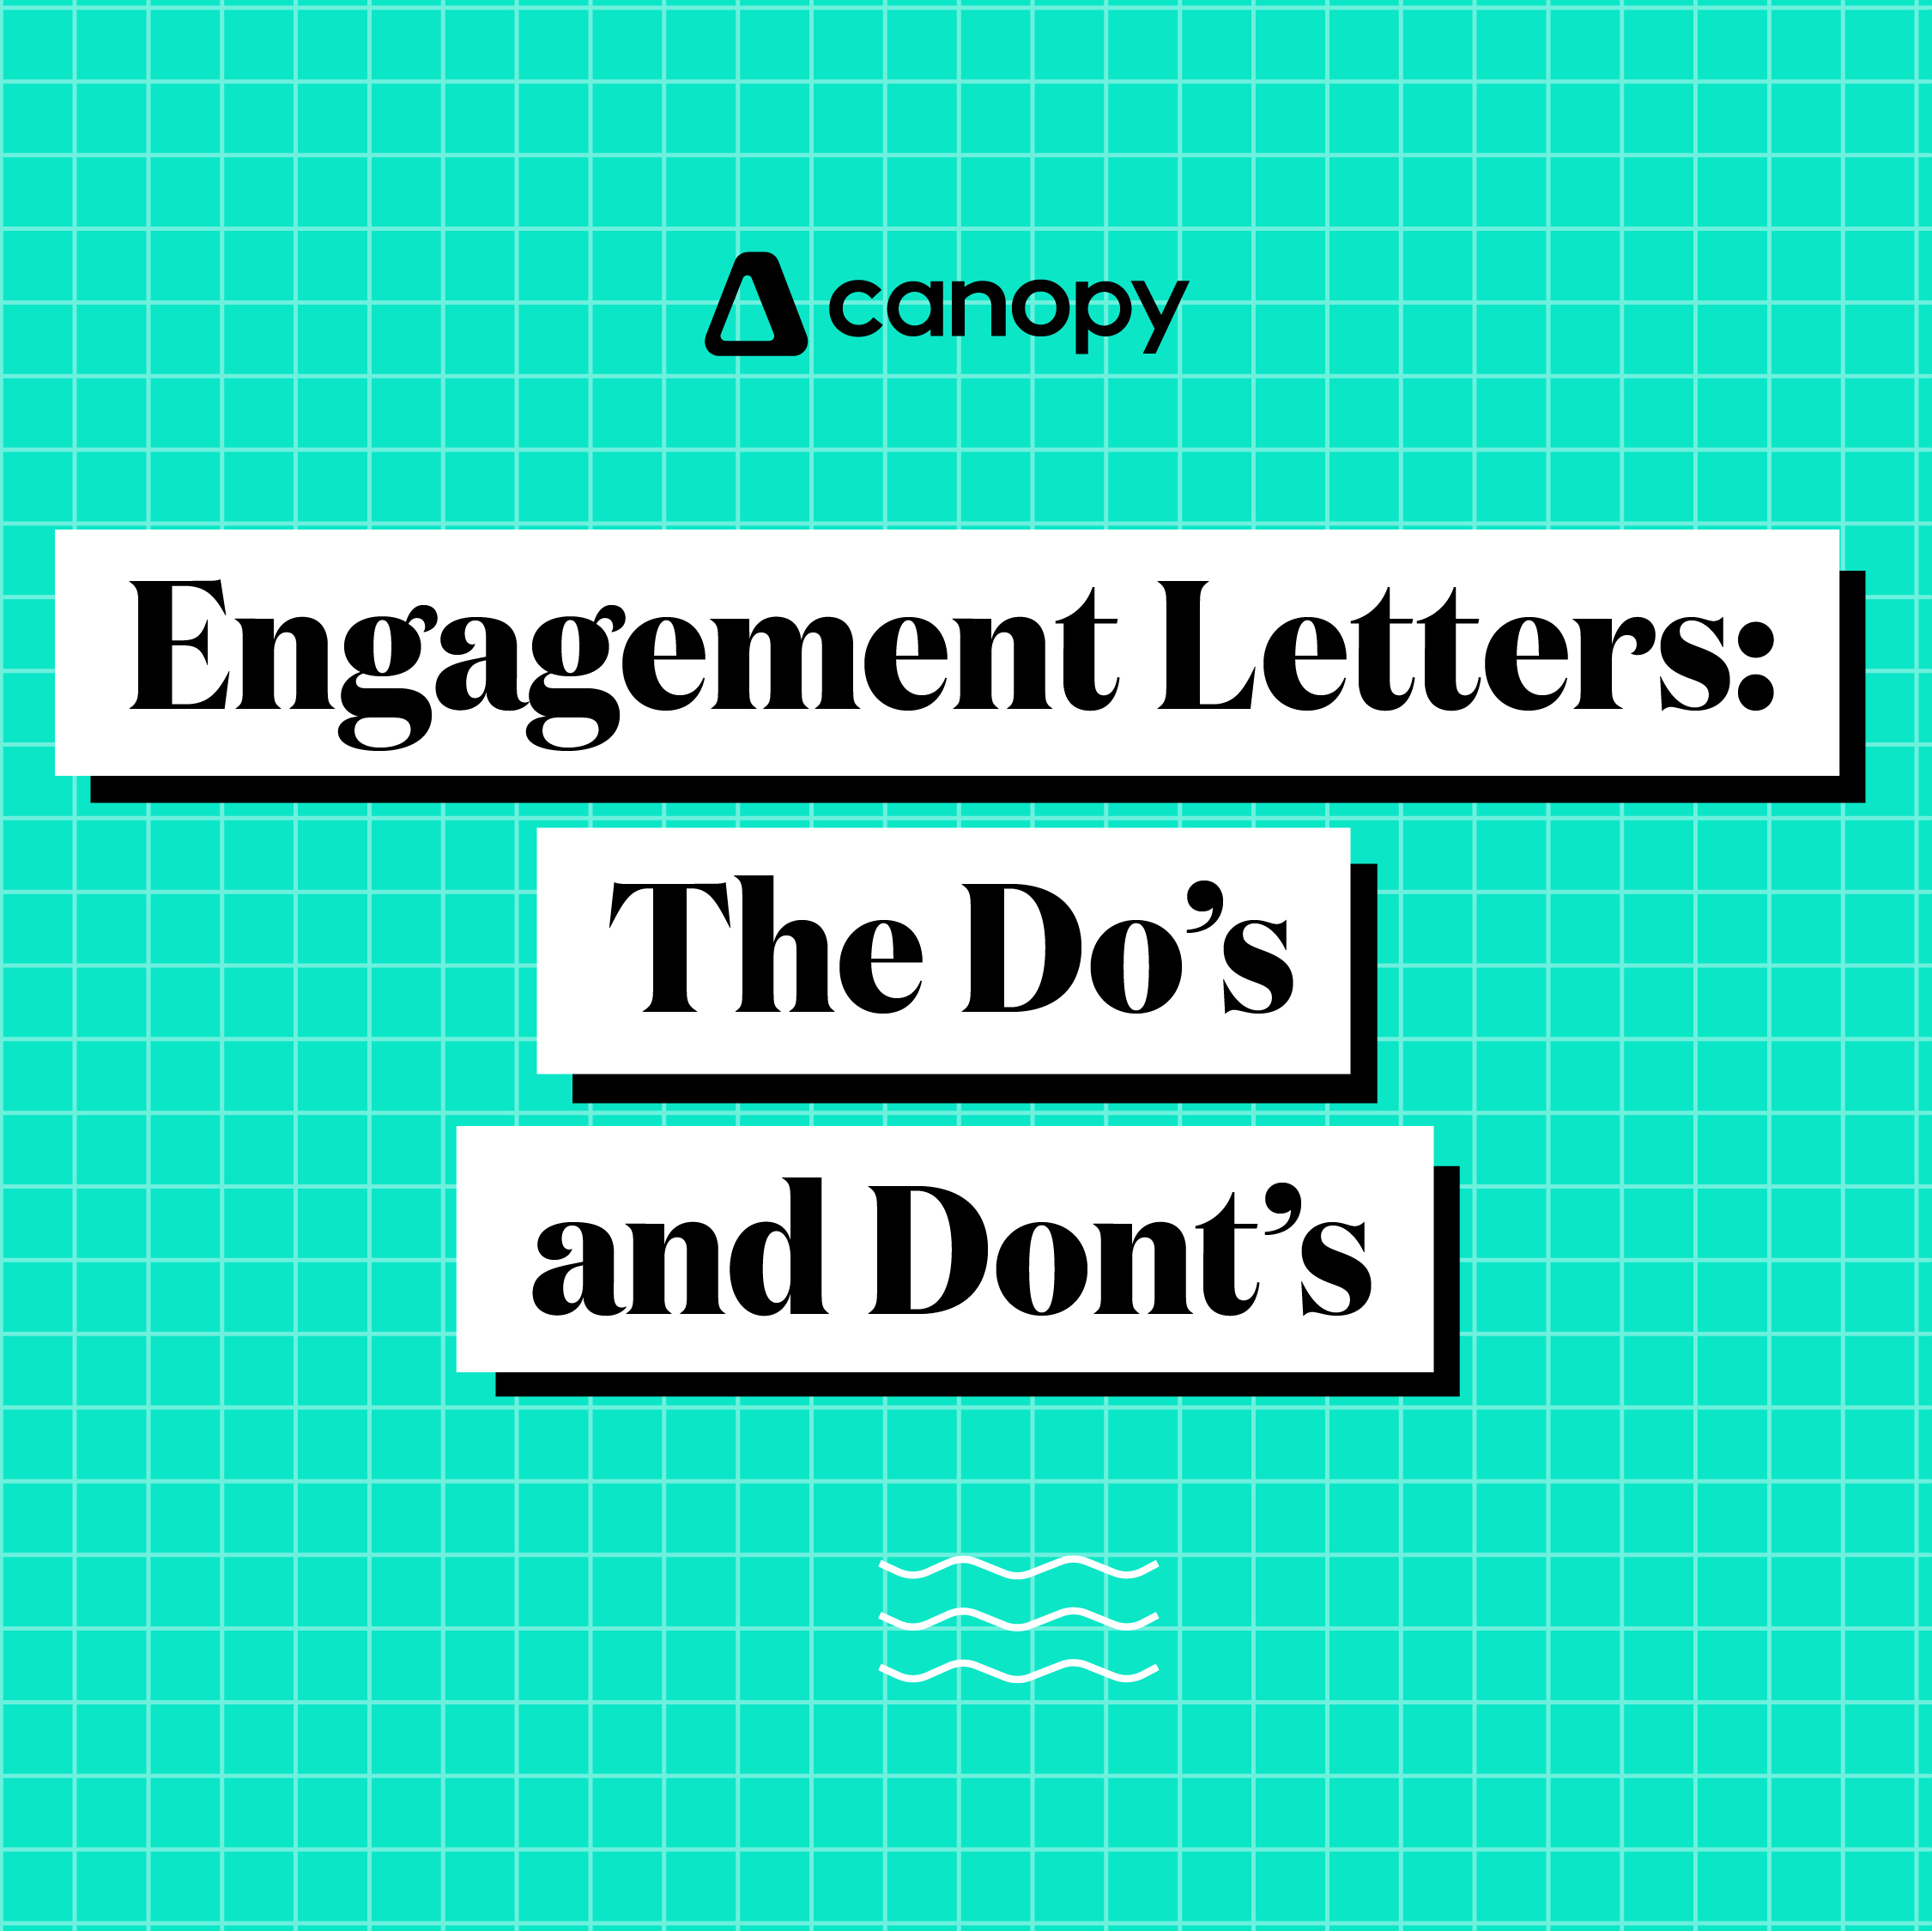 Engagement Letters: The Do’s and Don'ts